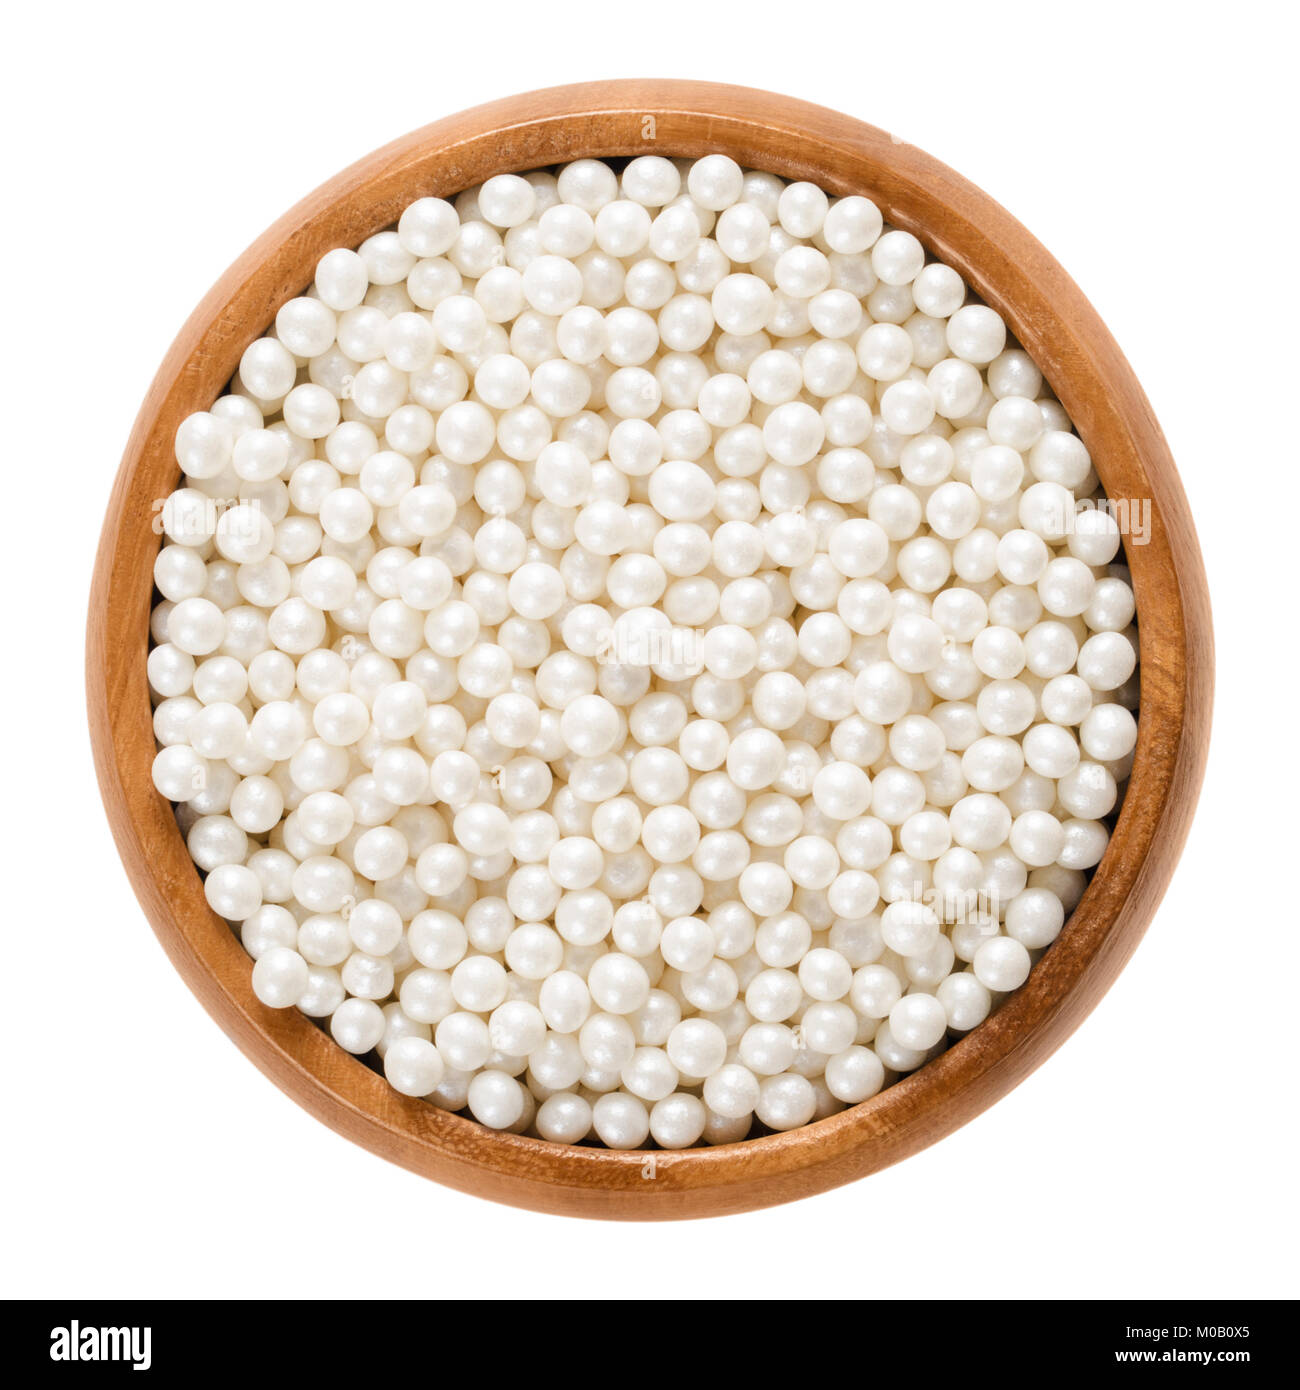 White nonpareils in wooden bowl. Hundreds and thousands. Decorative confectionery of tiny balls, made with sugar and starch, used for decoration. Stock Photo